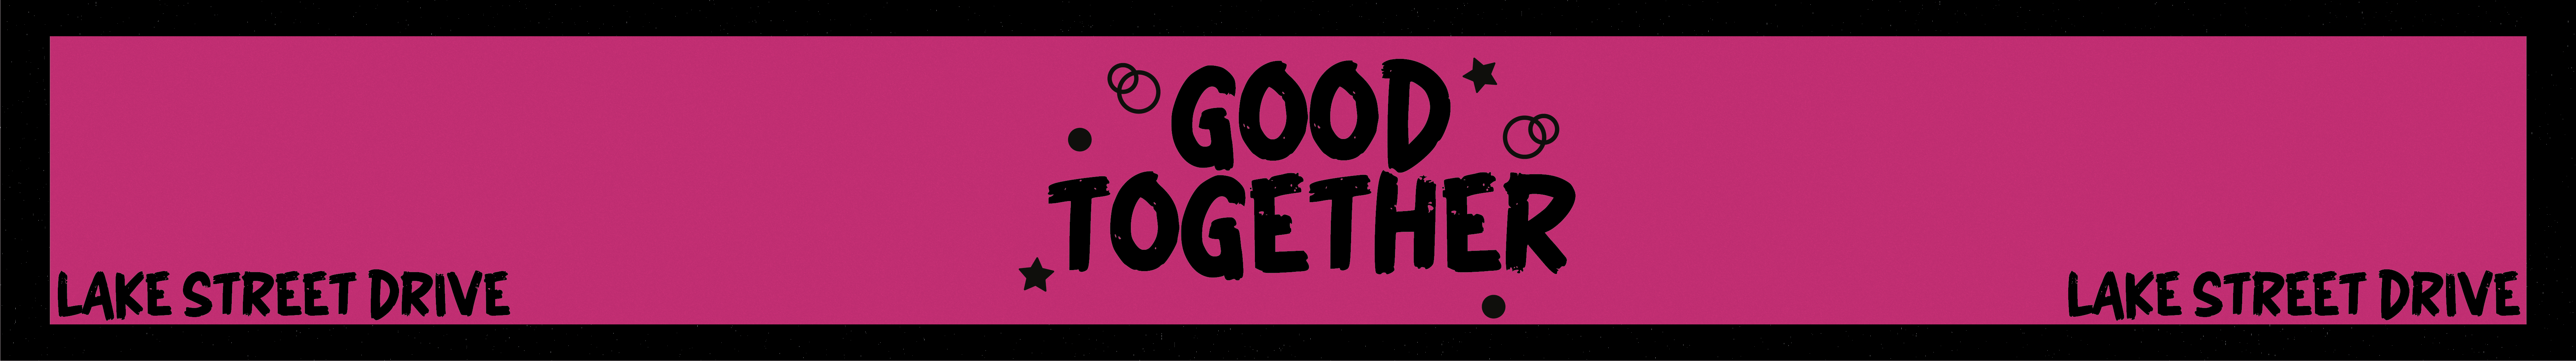 Graphics with a black border and bright pink background with text that reads "Good Together" in the center and "Lake Street Dive" along the bottom. A guitar pick in the top left corner says "WERS 88.9 Pick of the Week"